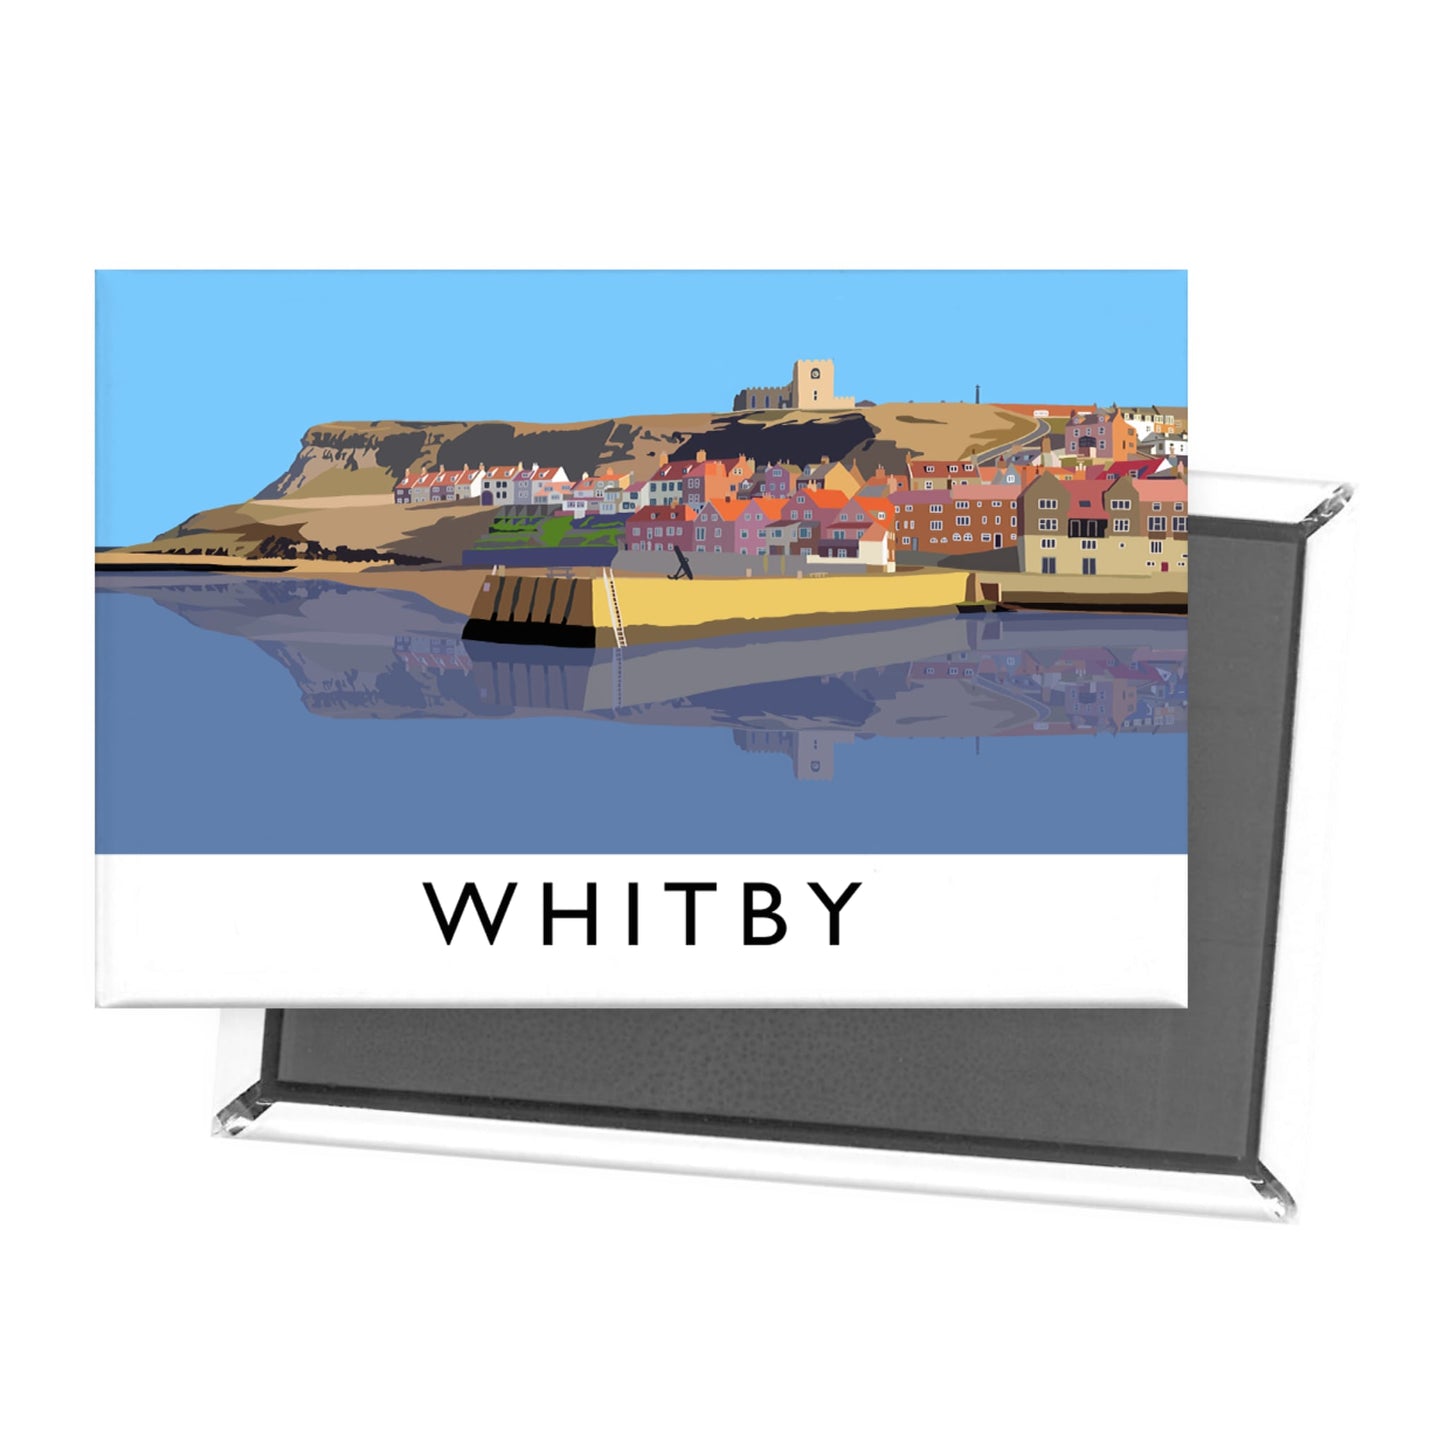 Whitby Magnet - The Great Yorkshire Shop